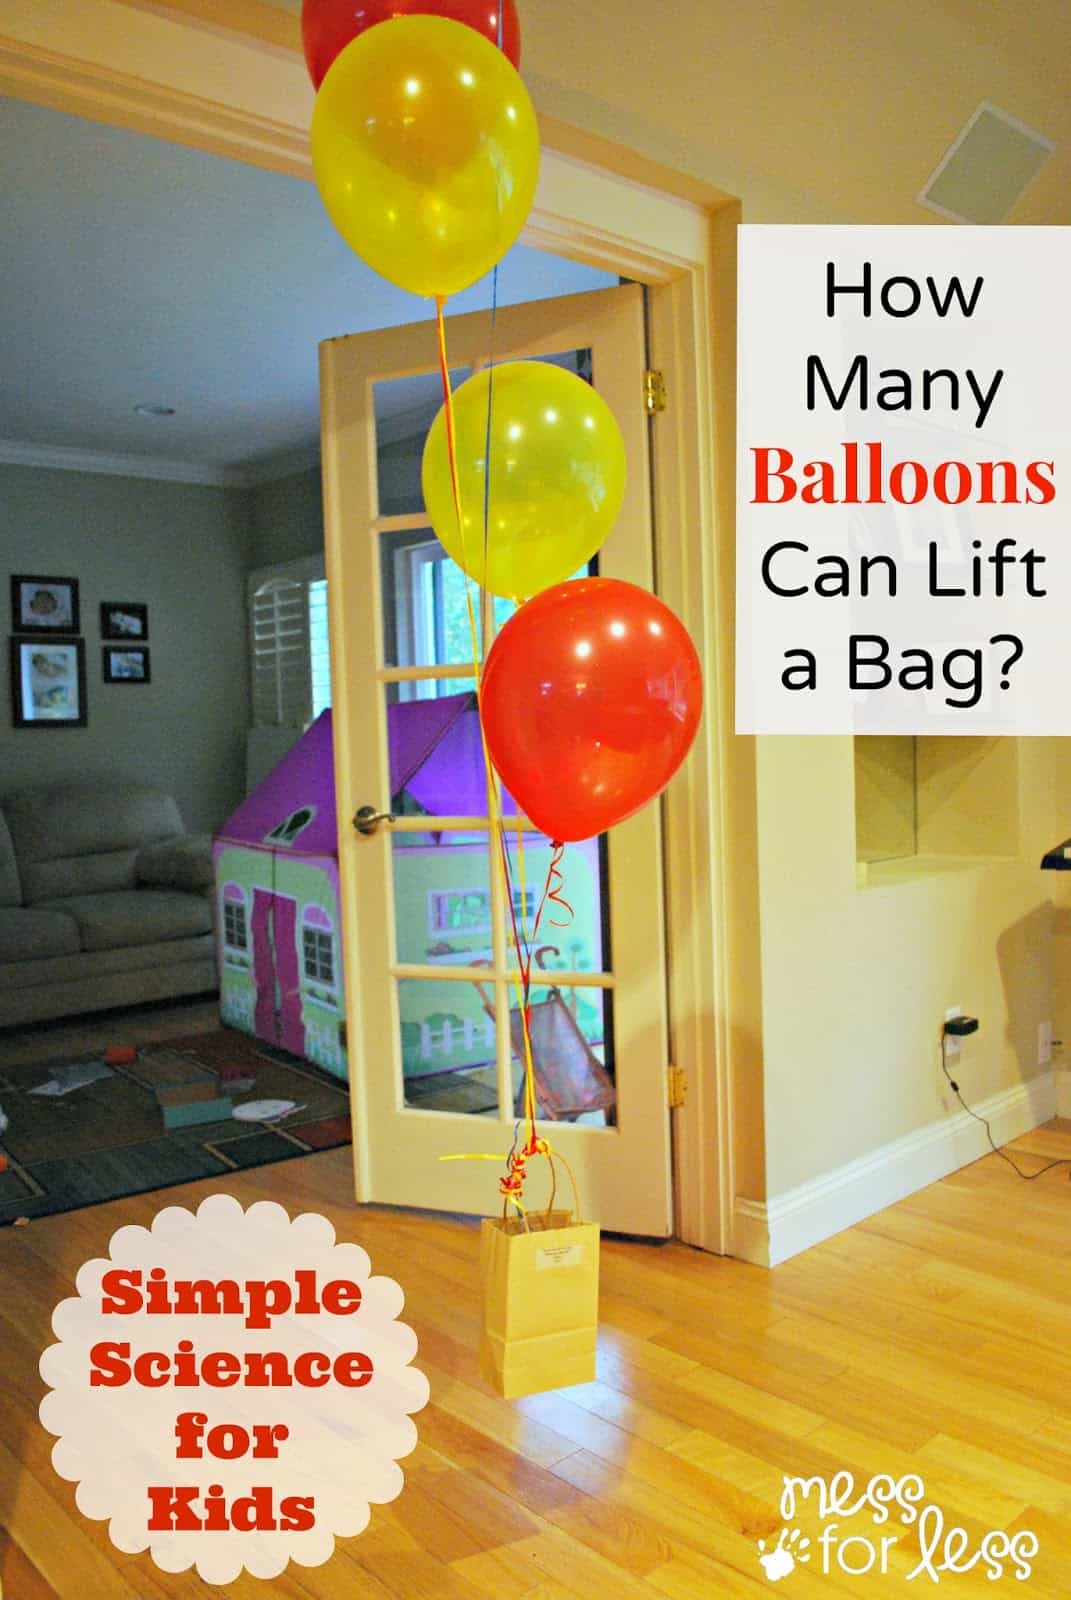 Simple Science - Discover how many balloons can lift a bag